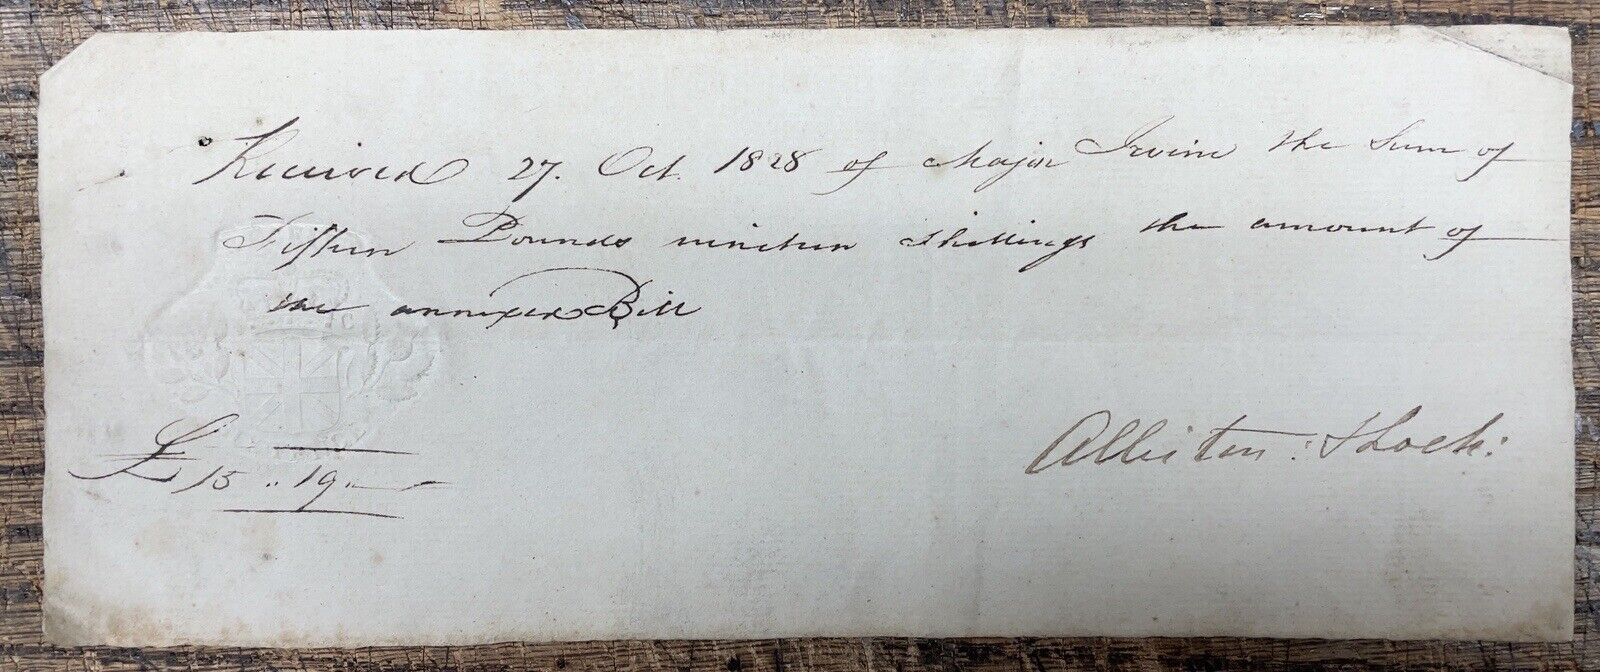 1828 English Receipt of 15£, 19sh, for “ Annexed bill”, w/ embossed tax stamp